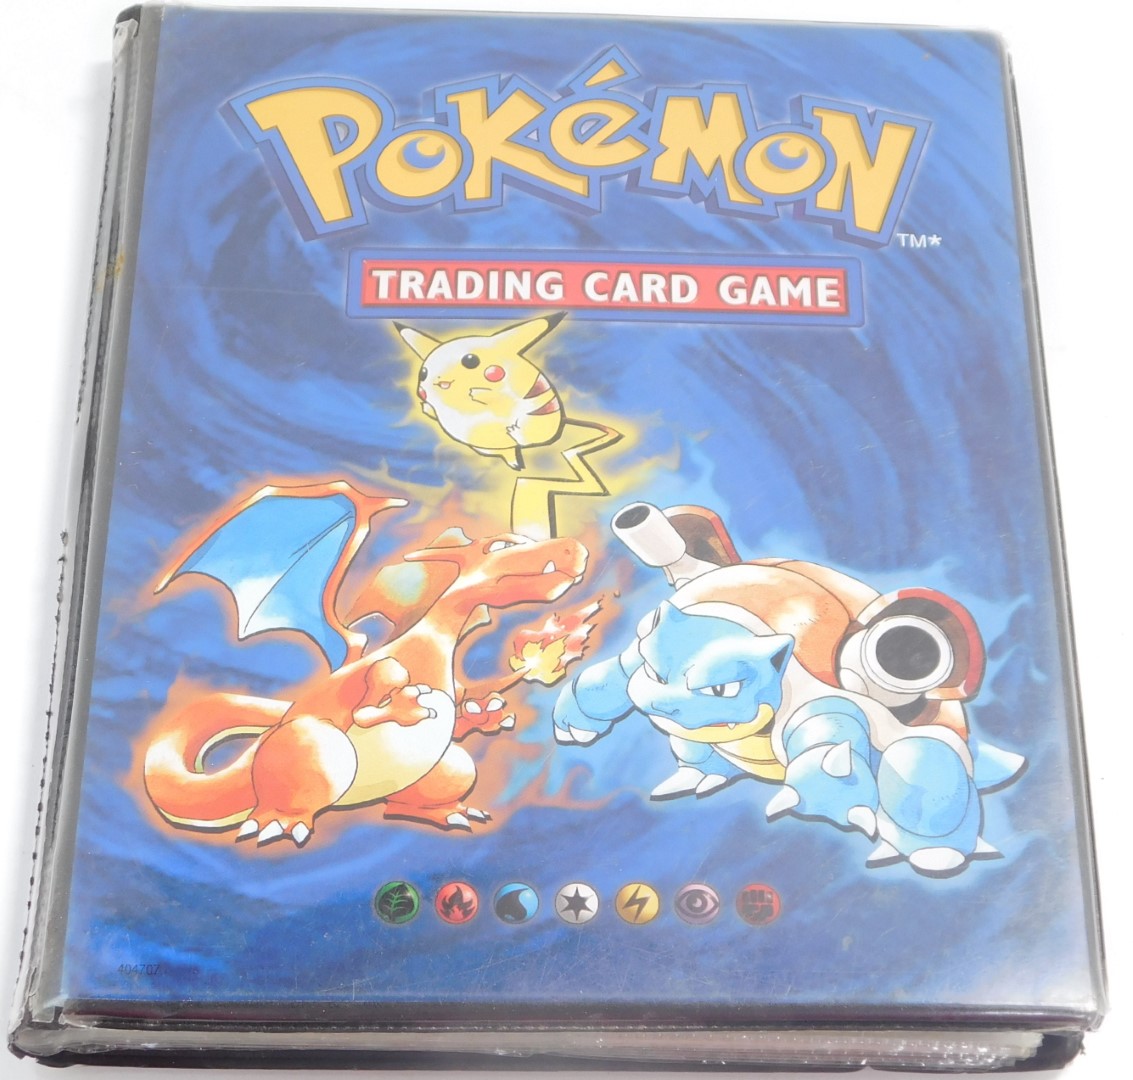 Pokemon Trading Cards, comprising Growlithe (4)., Bellsprout (2)., Tentacruel., Dragonite., Weedle